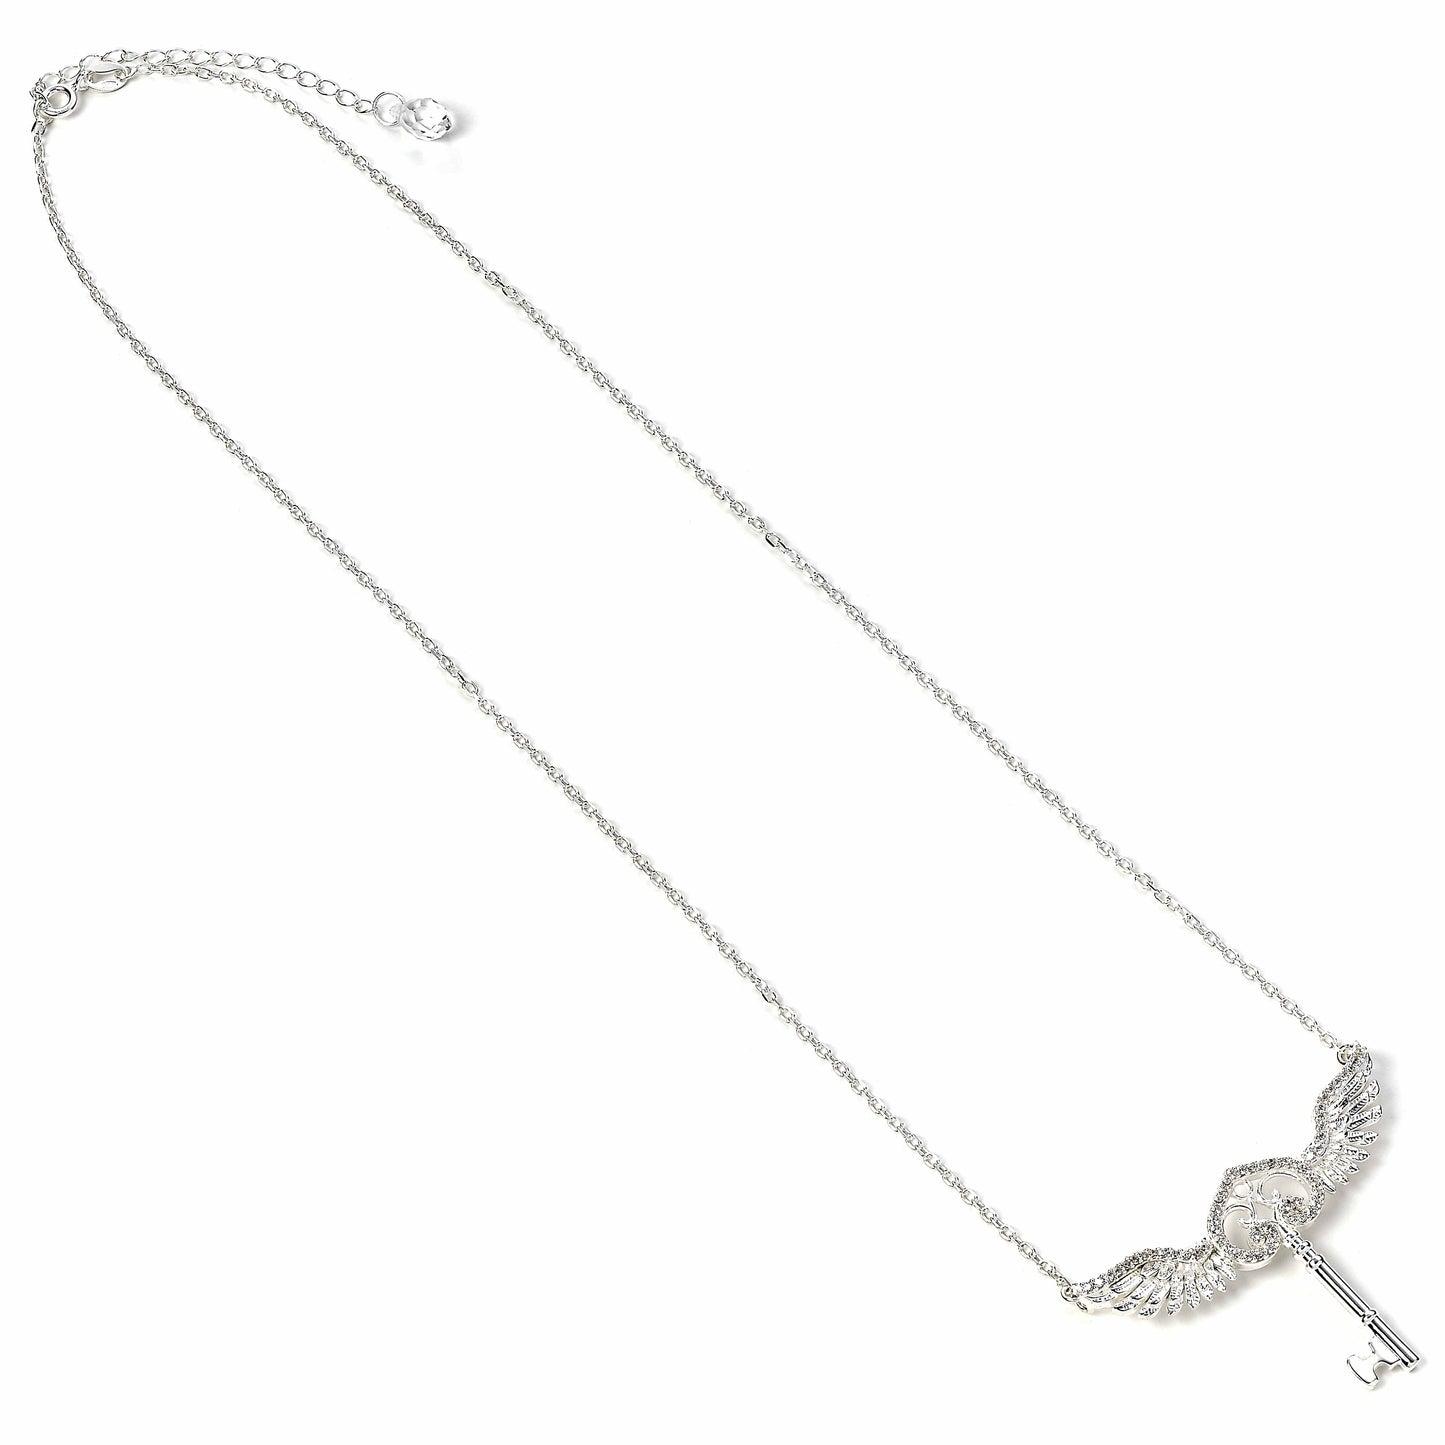 Harry Potter Flying Key Necklace Embellished with Crystals - Sterling Silver